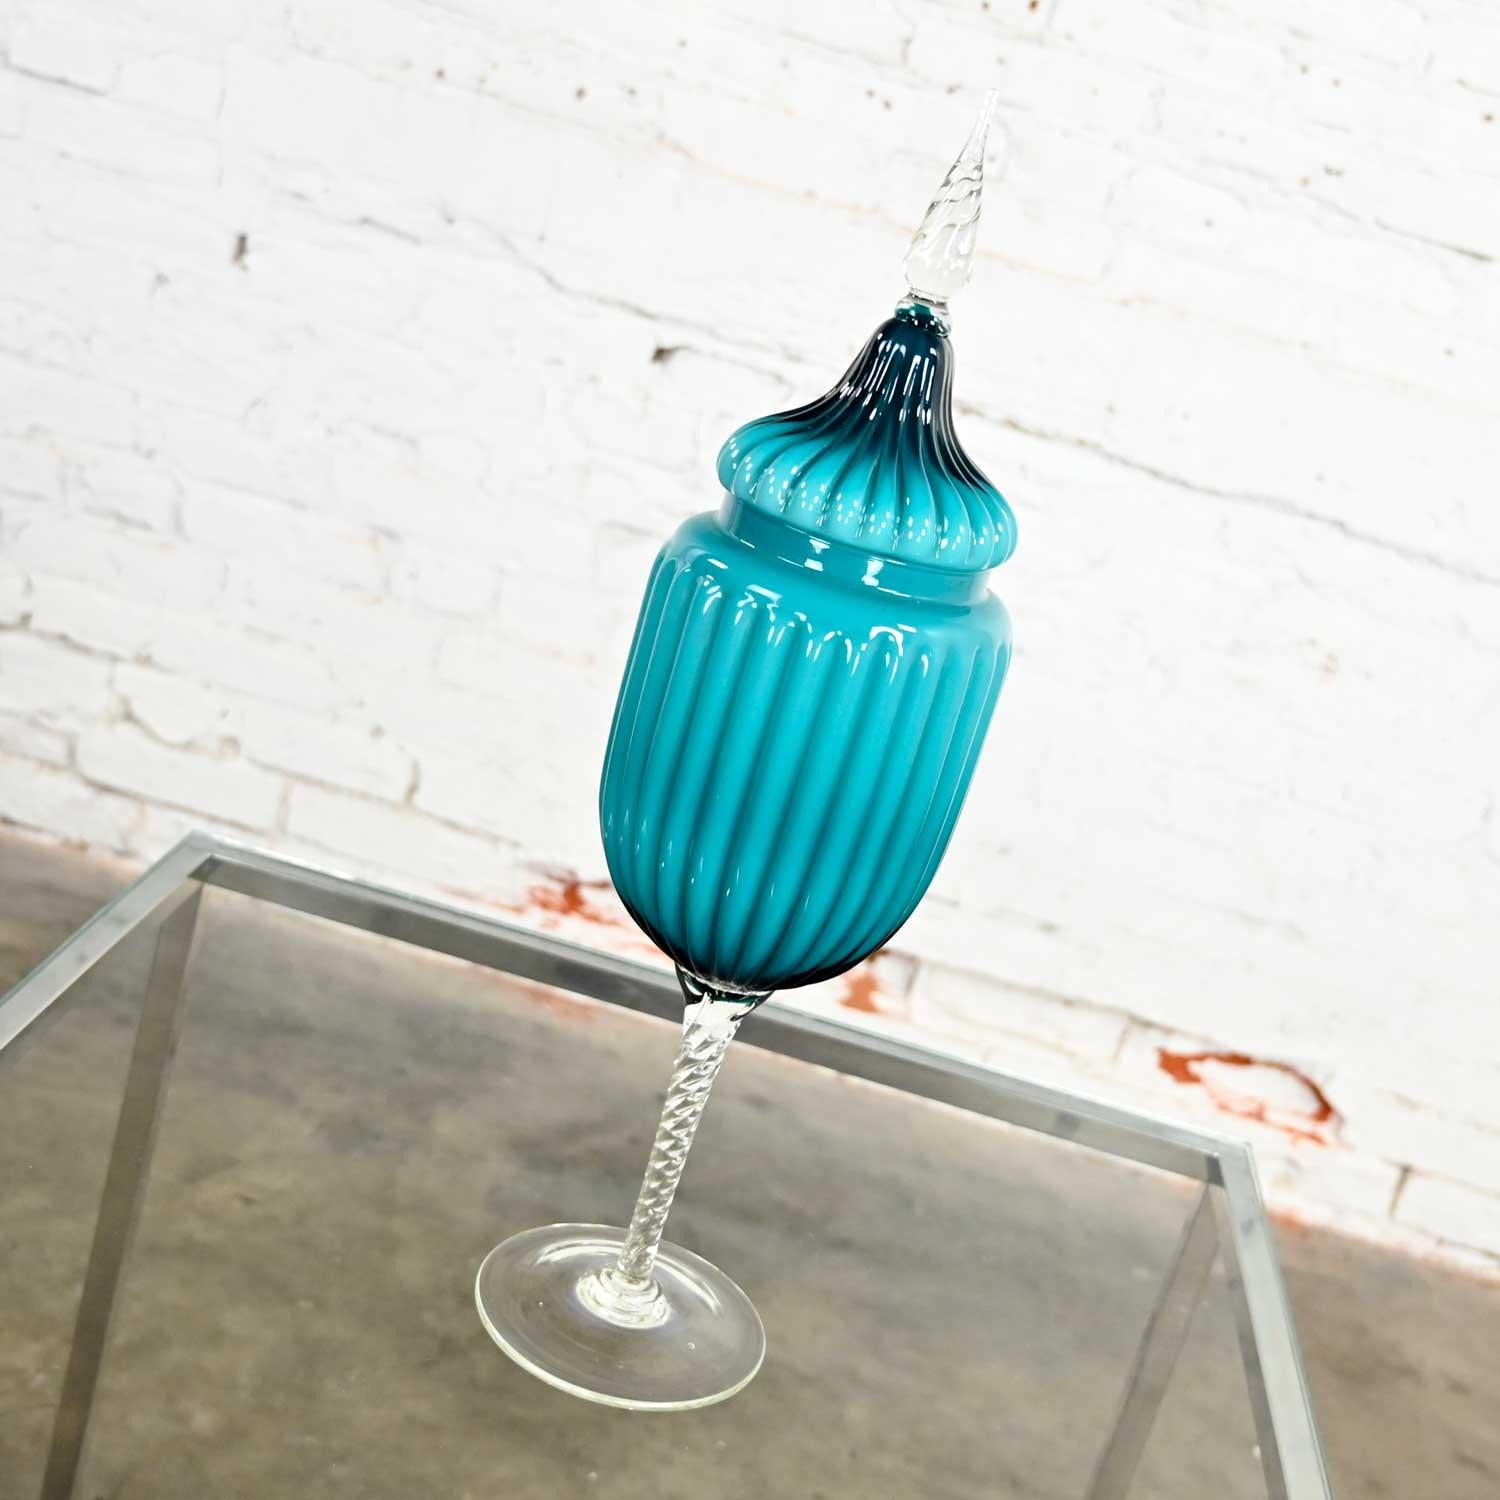 Gorgeous Empoli Italian cased glass lidded compote circus tent jar in peacock blue. Beautiful condition, keeping in mind that this is vintage and not new so will have signs of use and wear. No chips, cracks, or chiggers that we have detected. Please